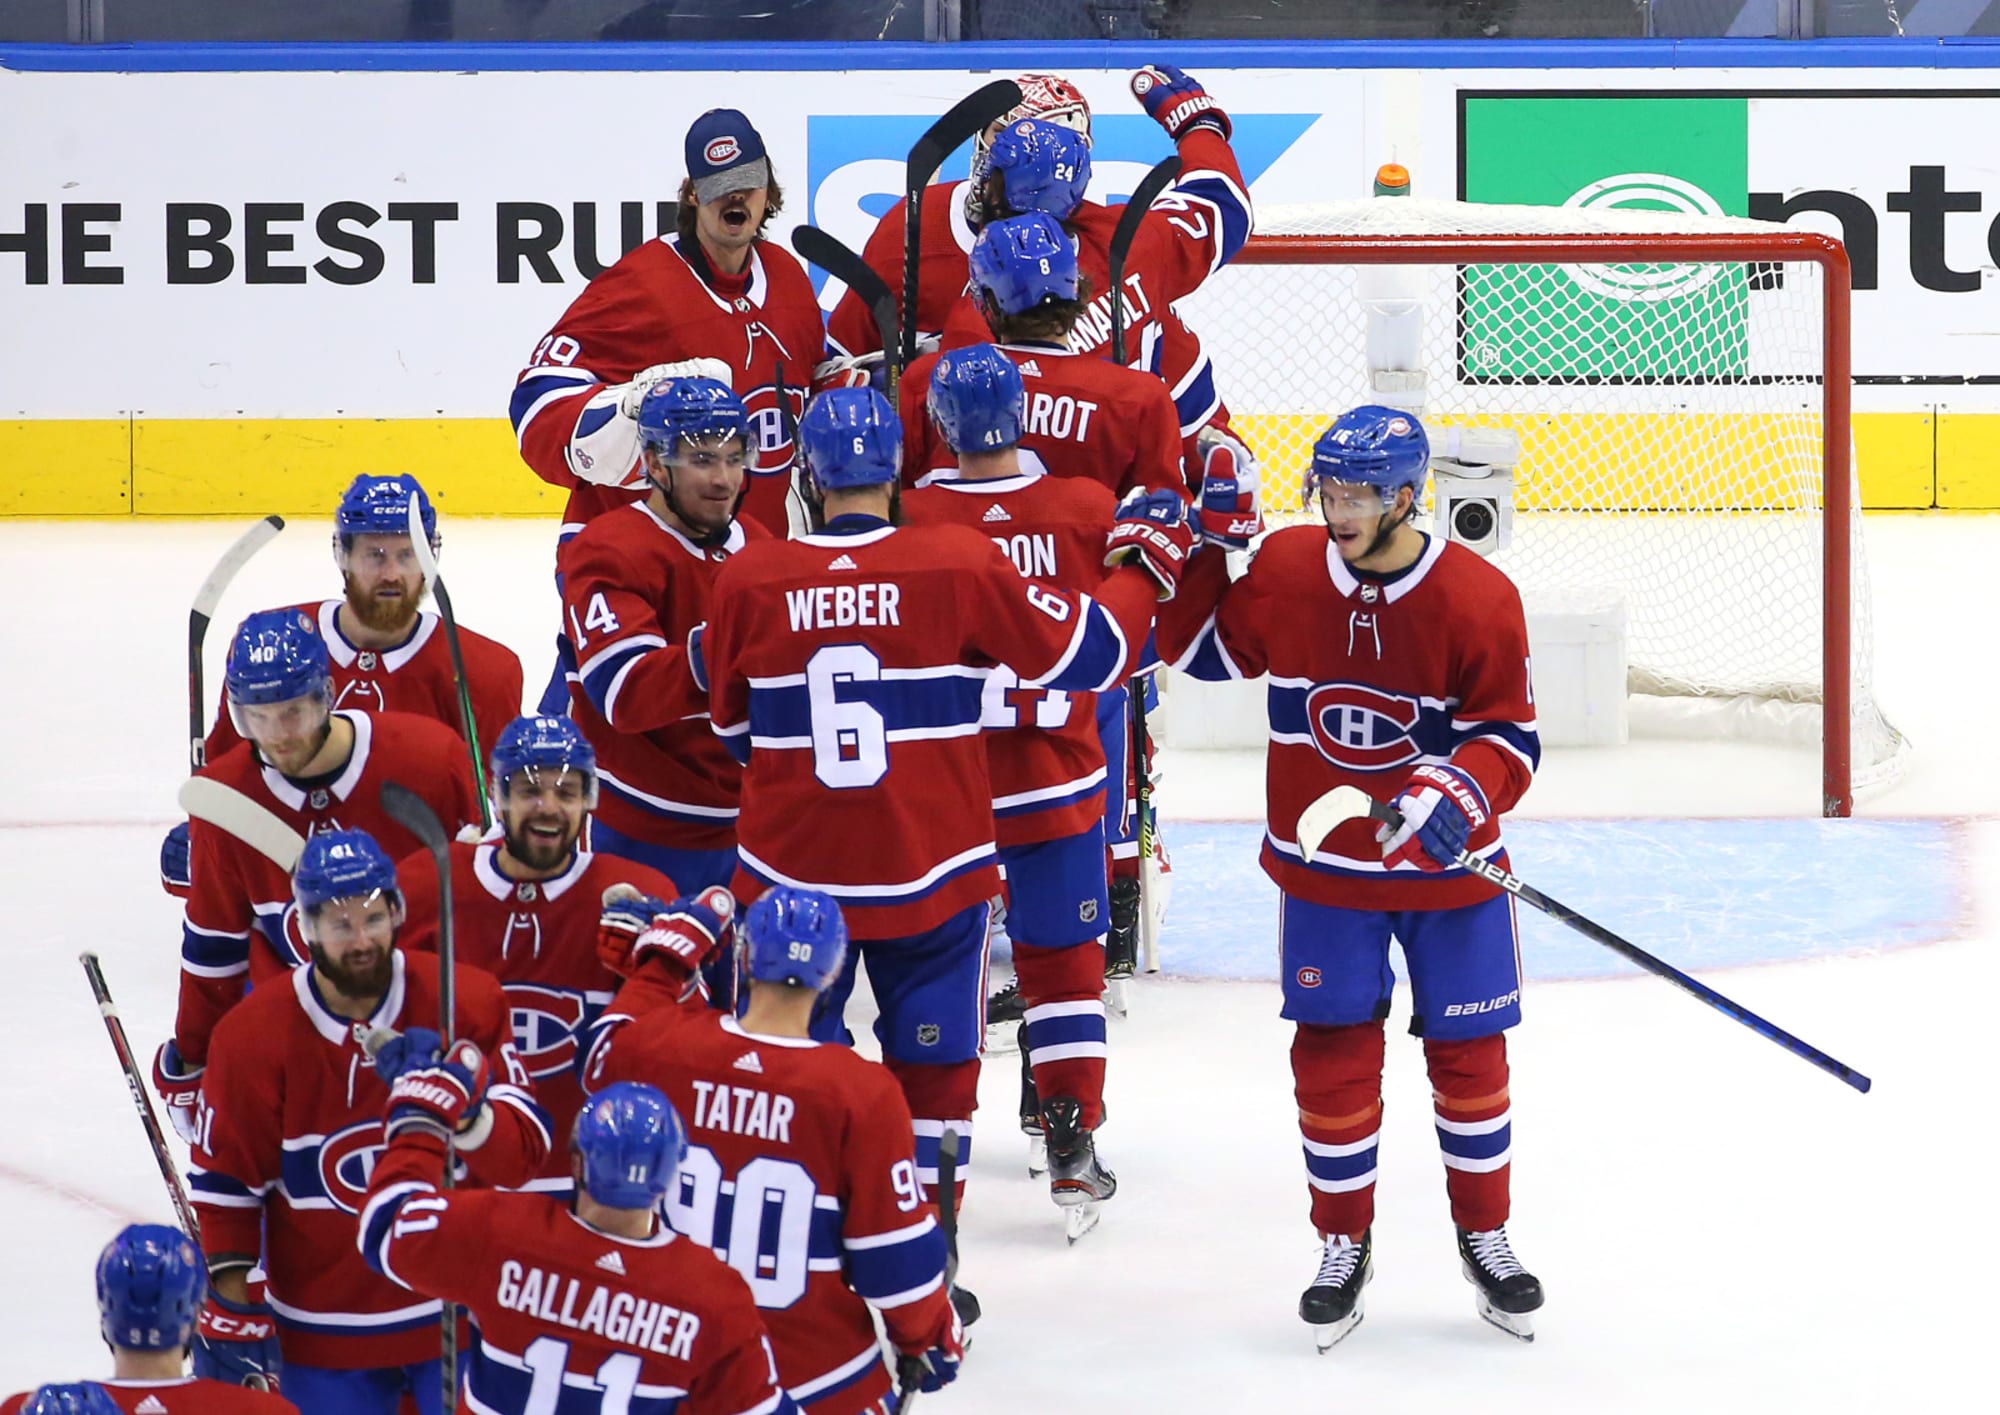 Montreal Canadiens Stun Penguins in Series Win, Advance to Playoffs